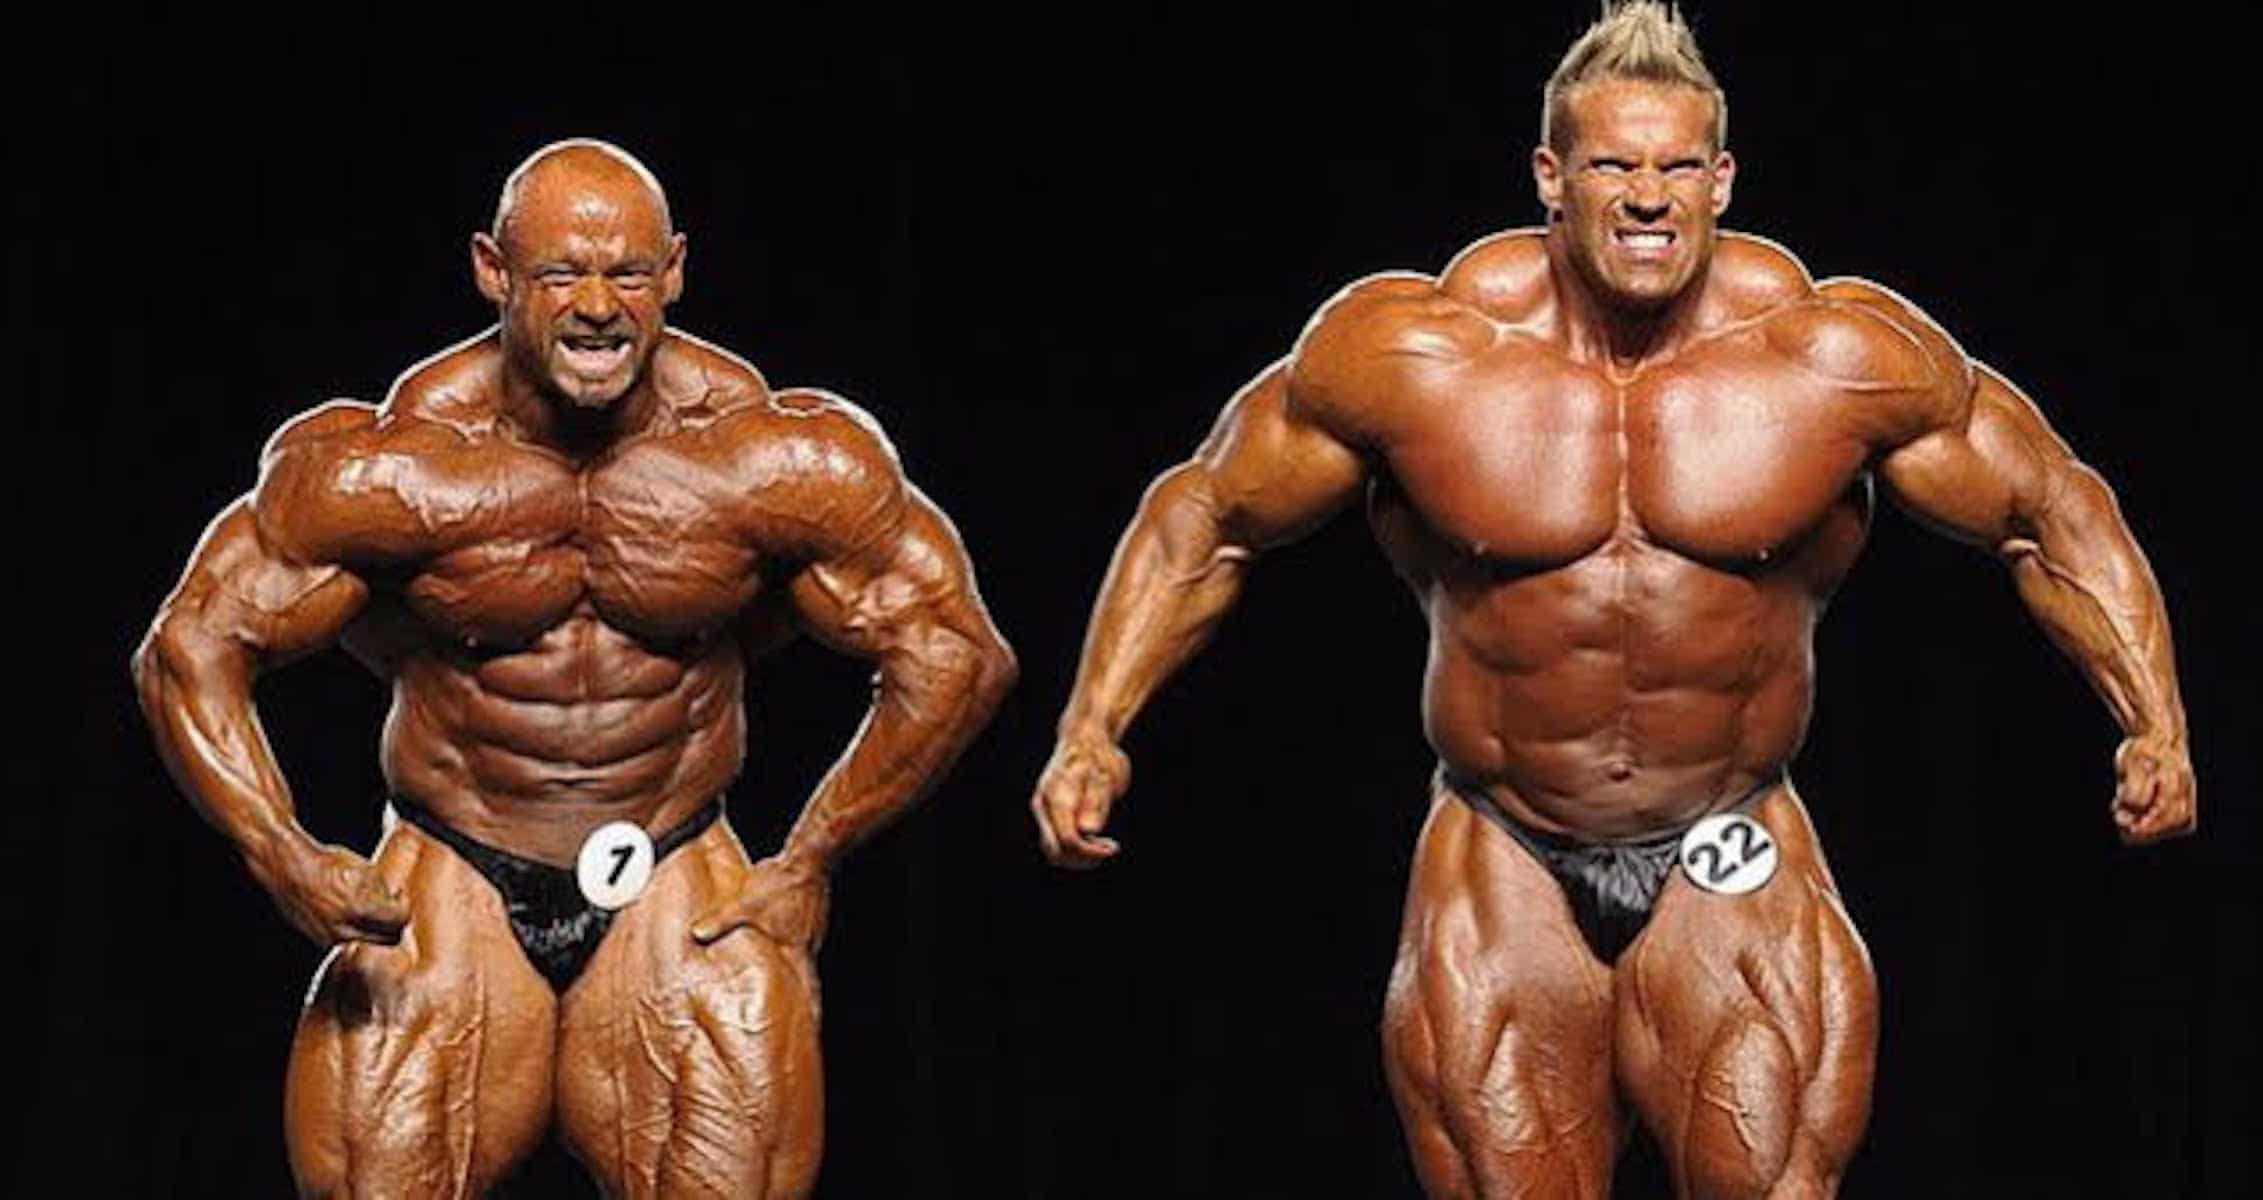 Branch Warren Defeated Reigning Champion Dexter Jackson In 2009 Olympia, Lost To Jay Cutler: ‘I Would Of Rather Got Third’